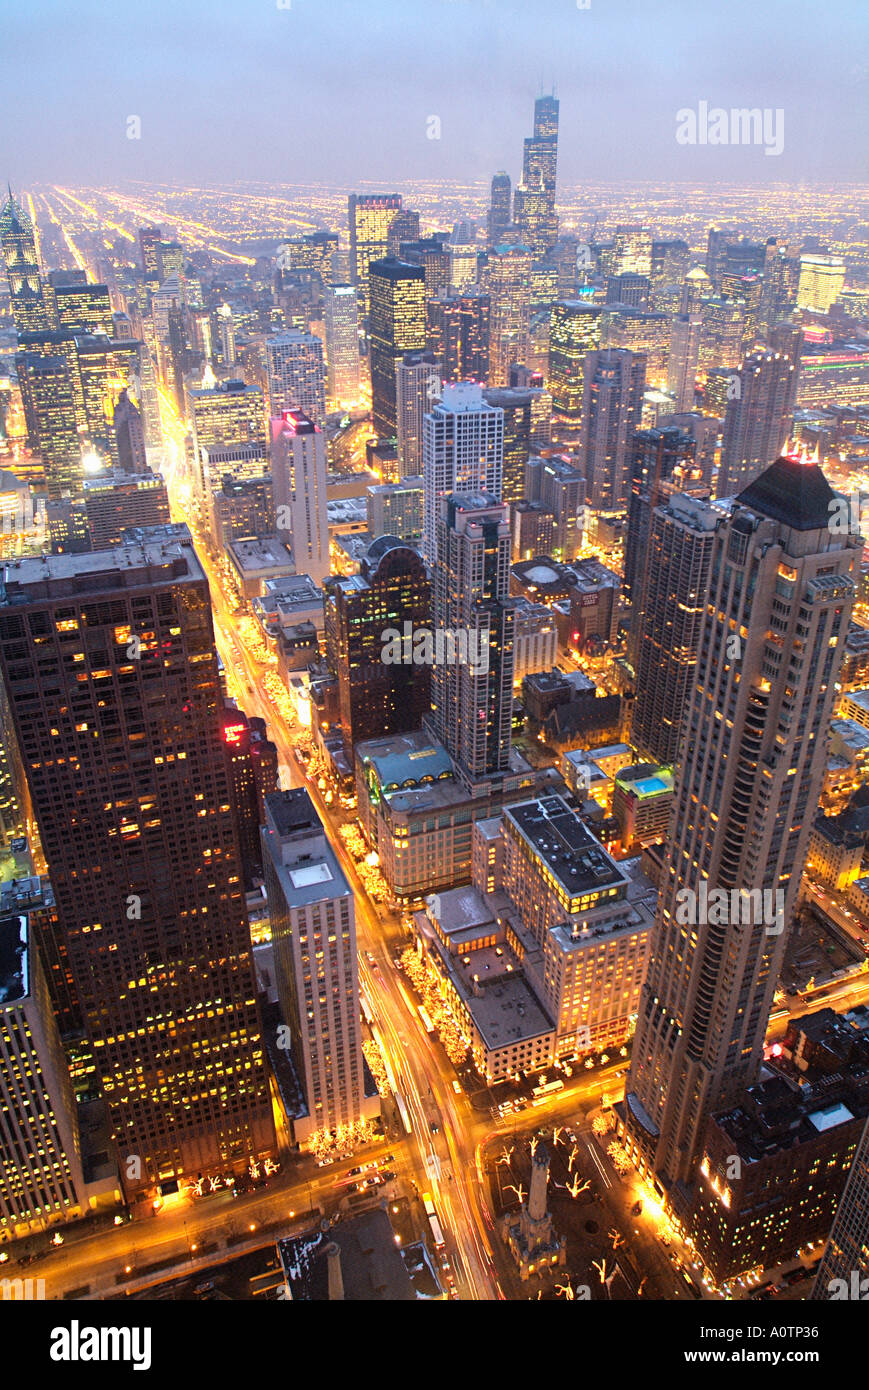 View of Chicago Illinois and Michigan Ave at night Stock Photo